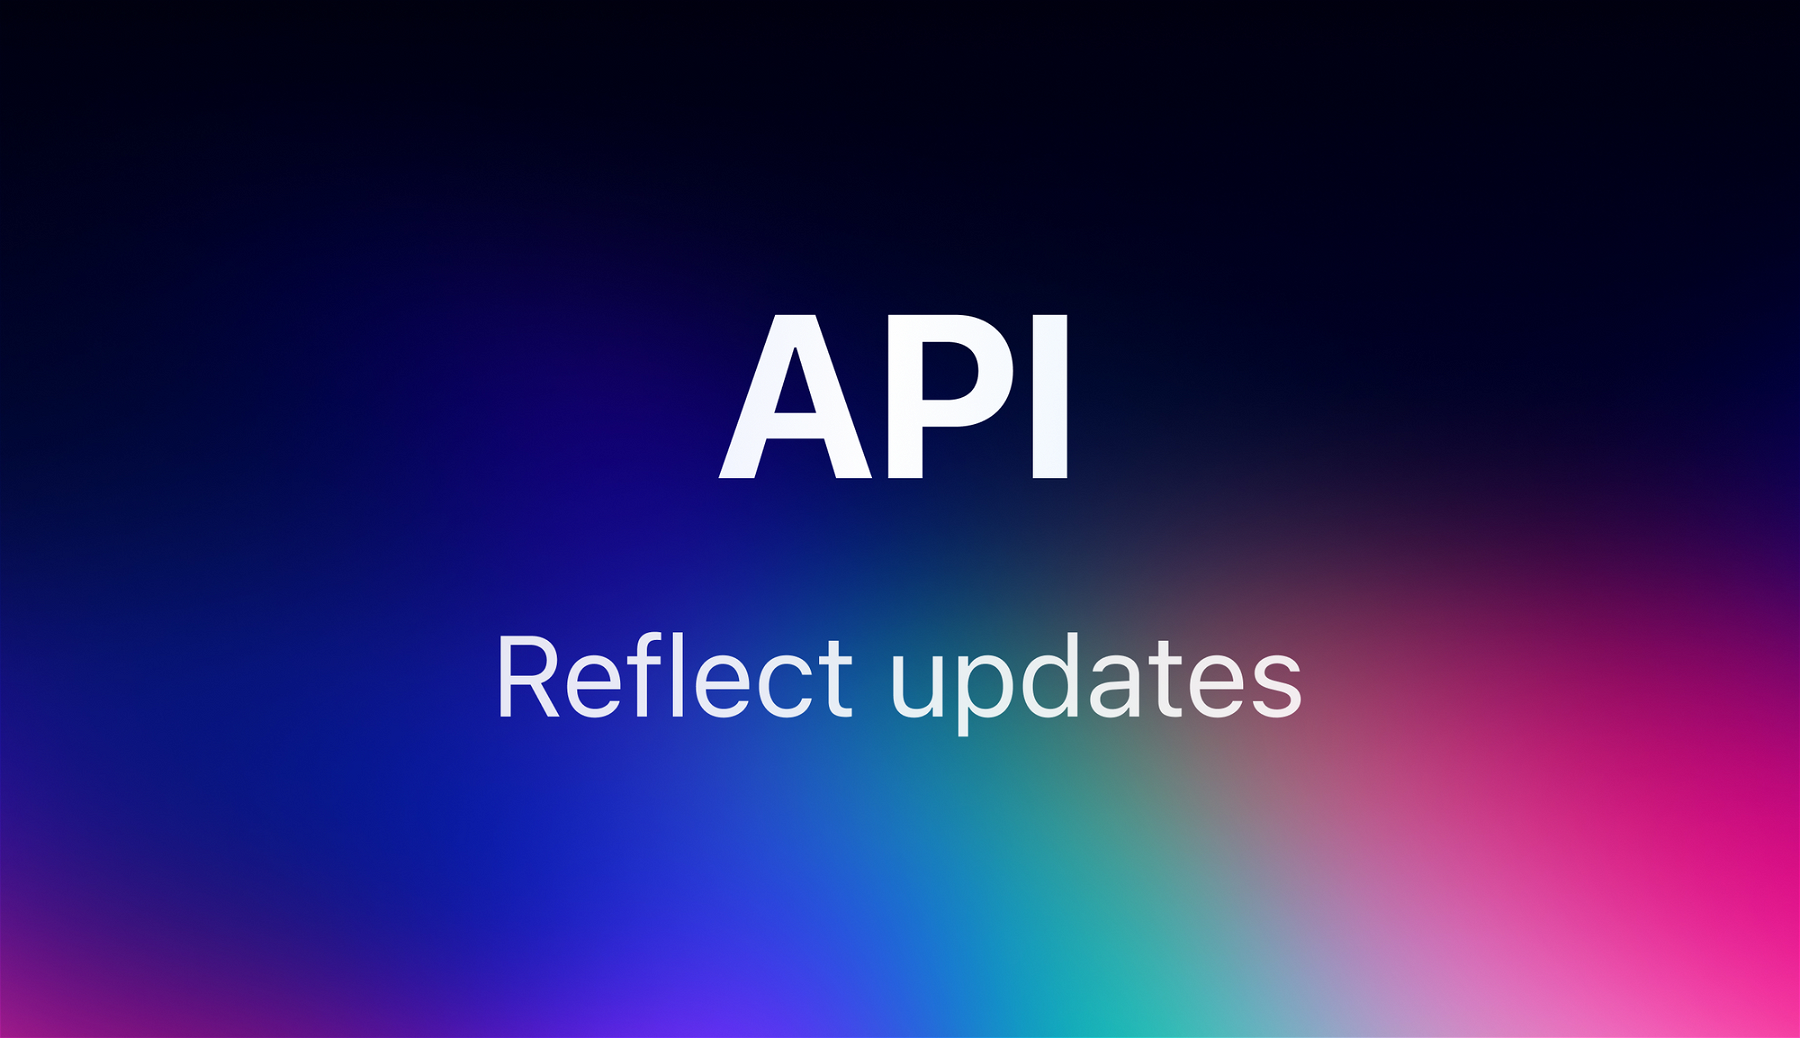 Reflect update: our API is live